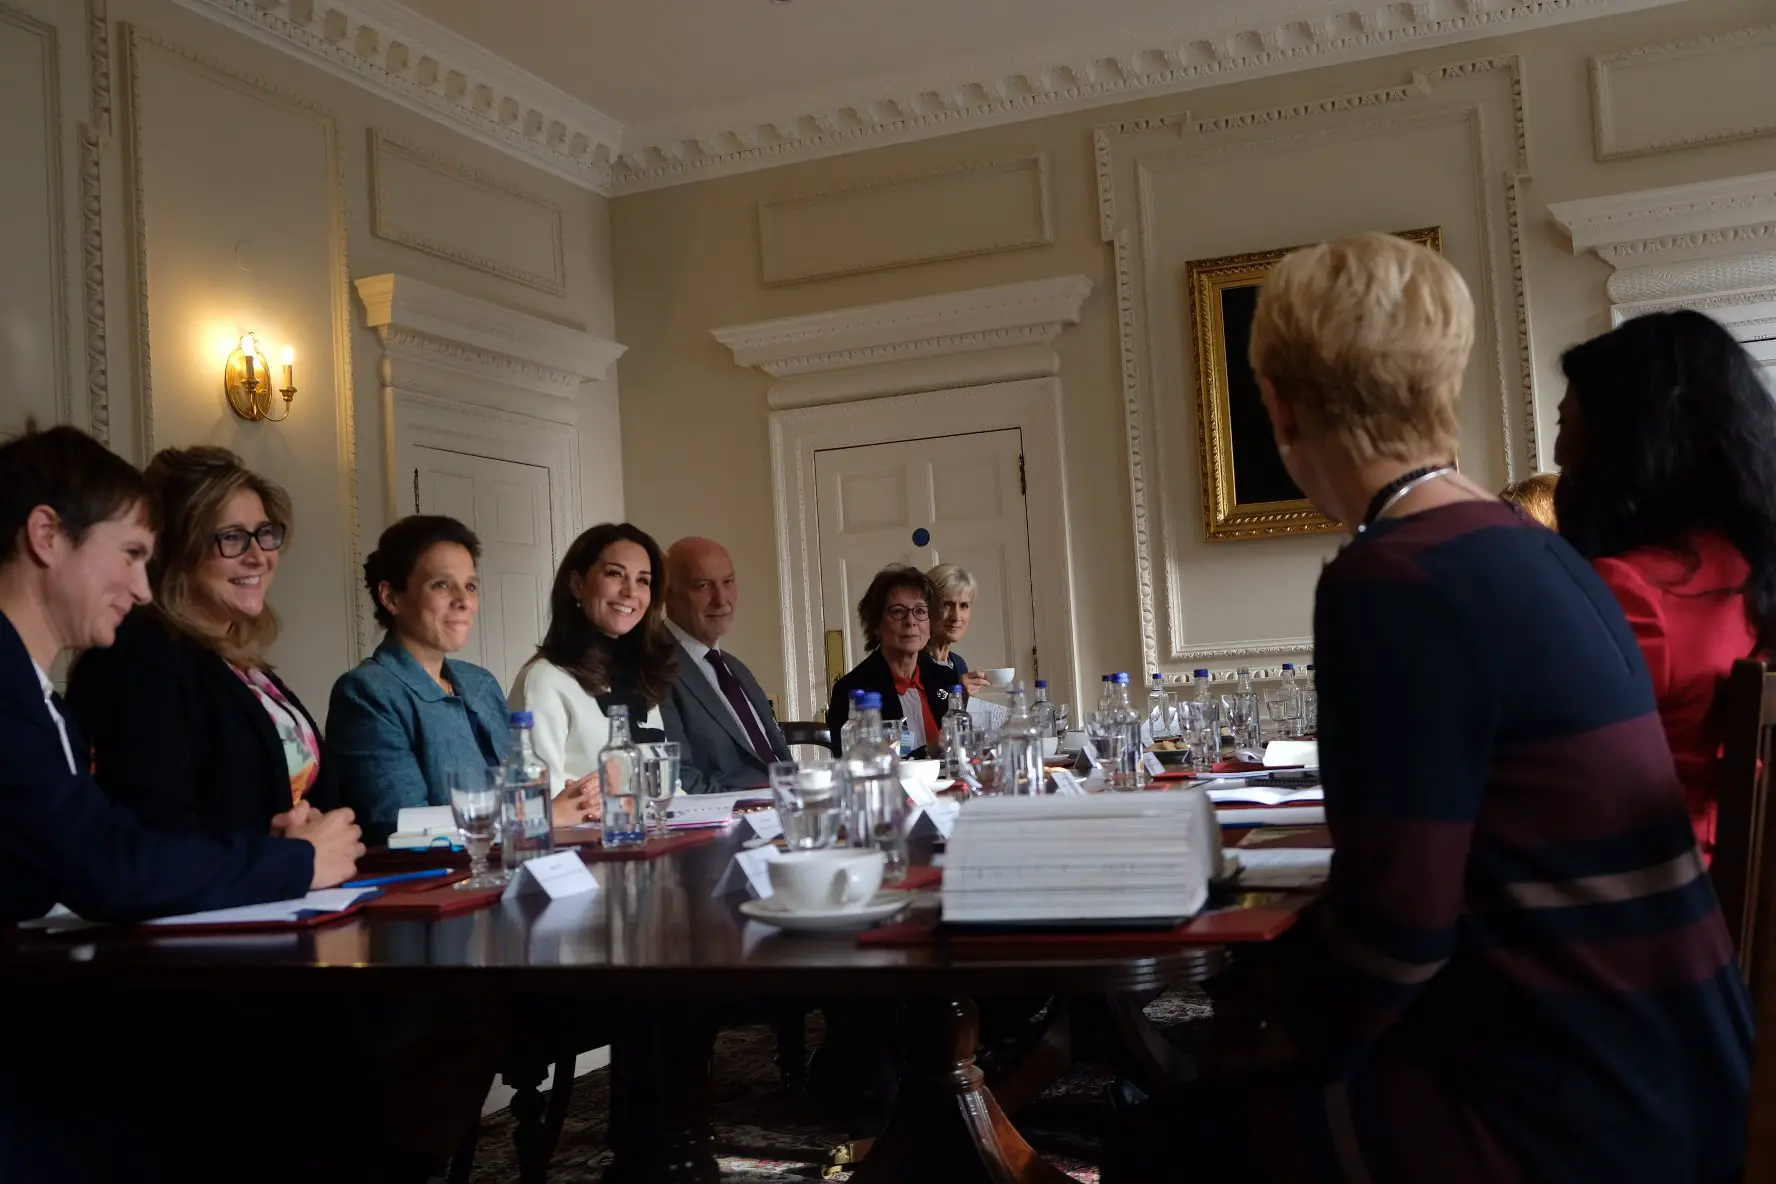 The Princess of Wales's first steering group in Early years was found in 2017